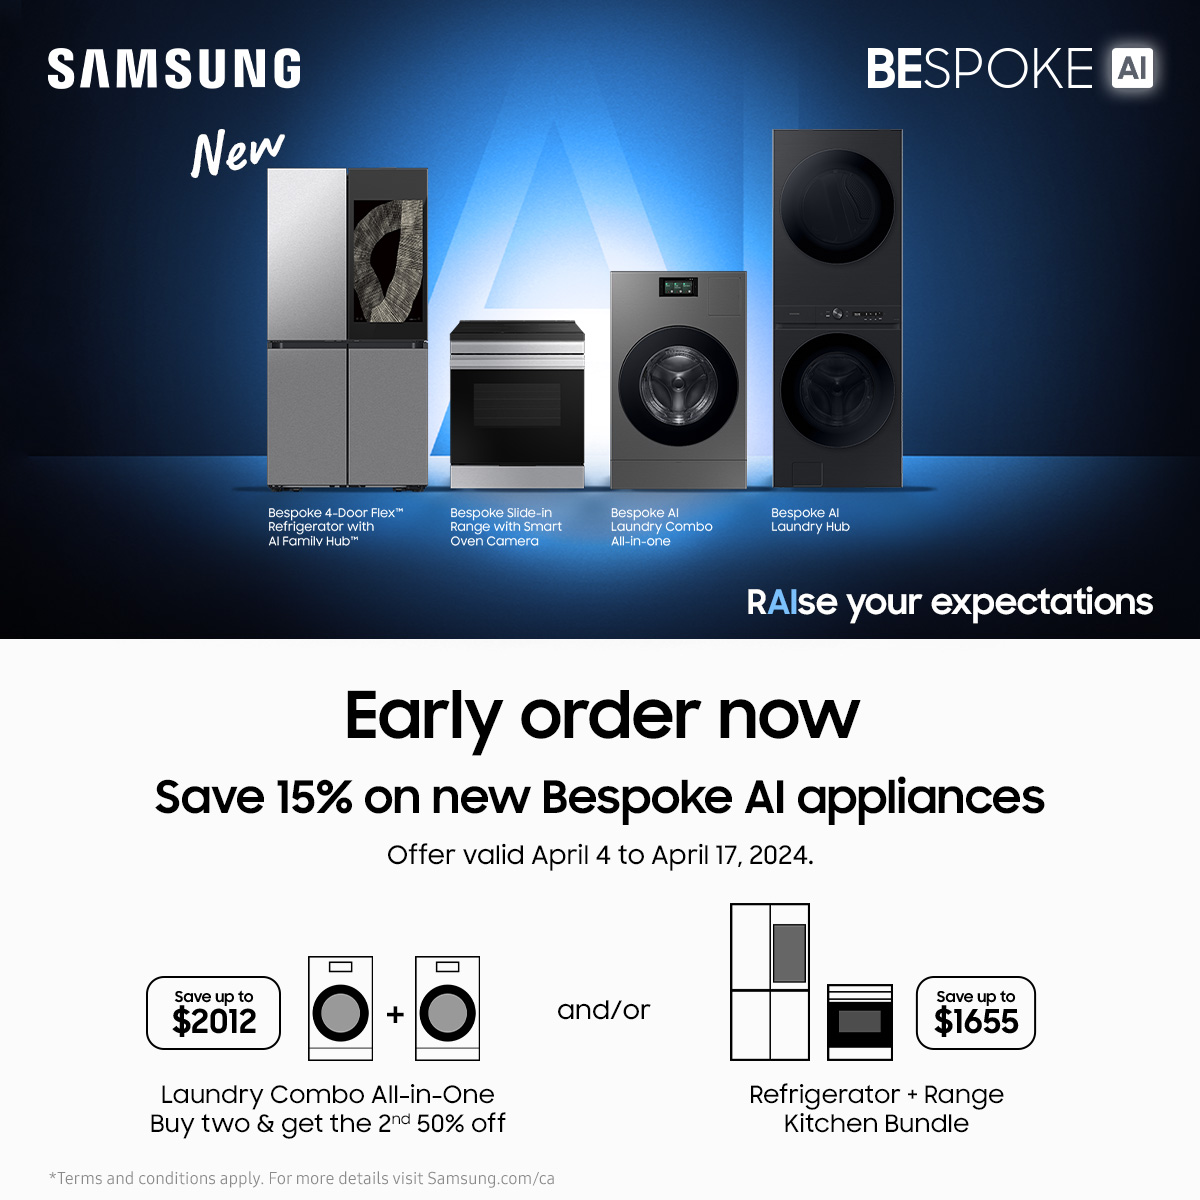 *Limited Time Offer* Early Order Now Offer Ends April 17th, 2024 #BespokeAI #DoMoreWithLess #ThisIsConnectedLiving #SamsungBespoke #Bespoke #Samsung